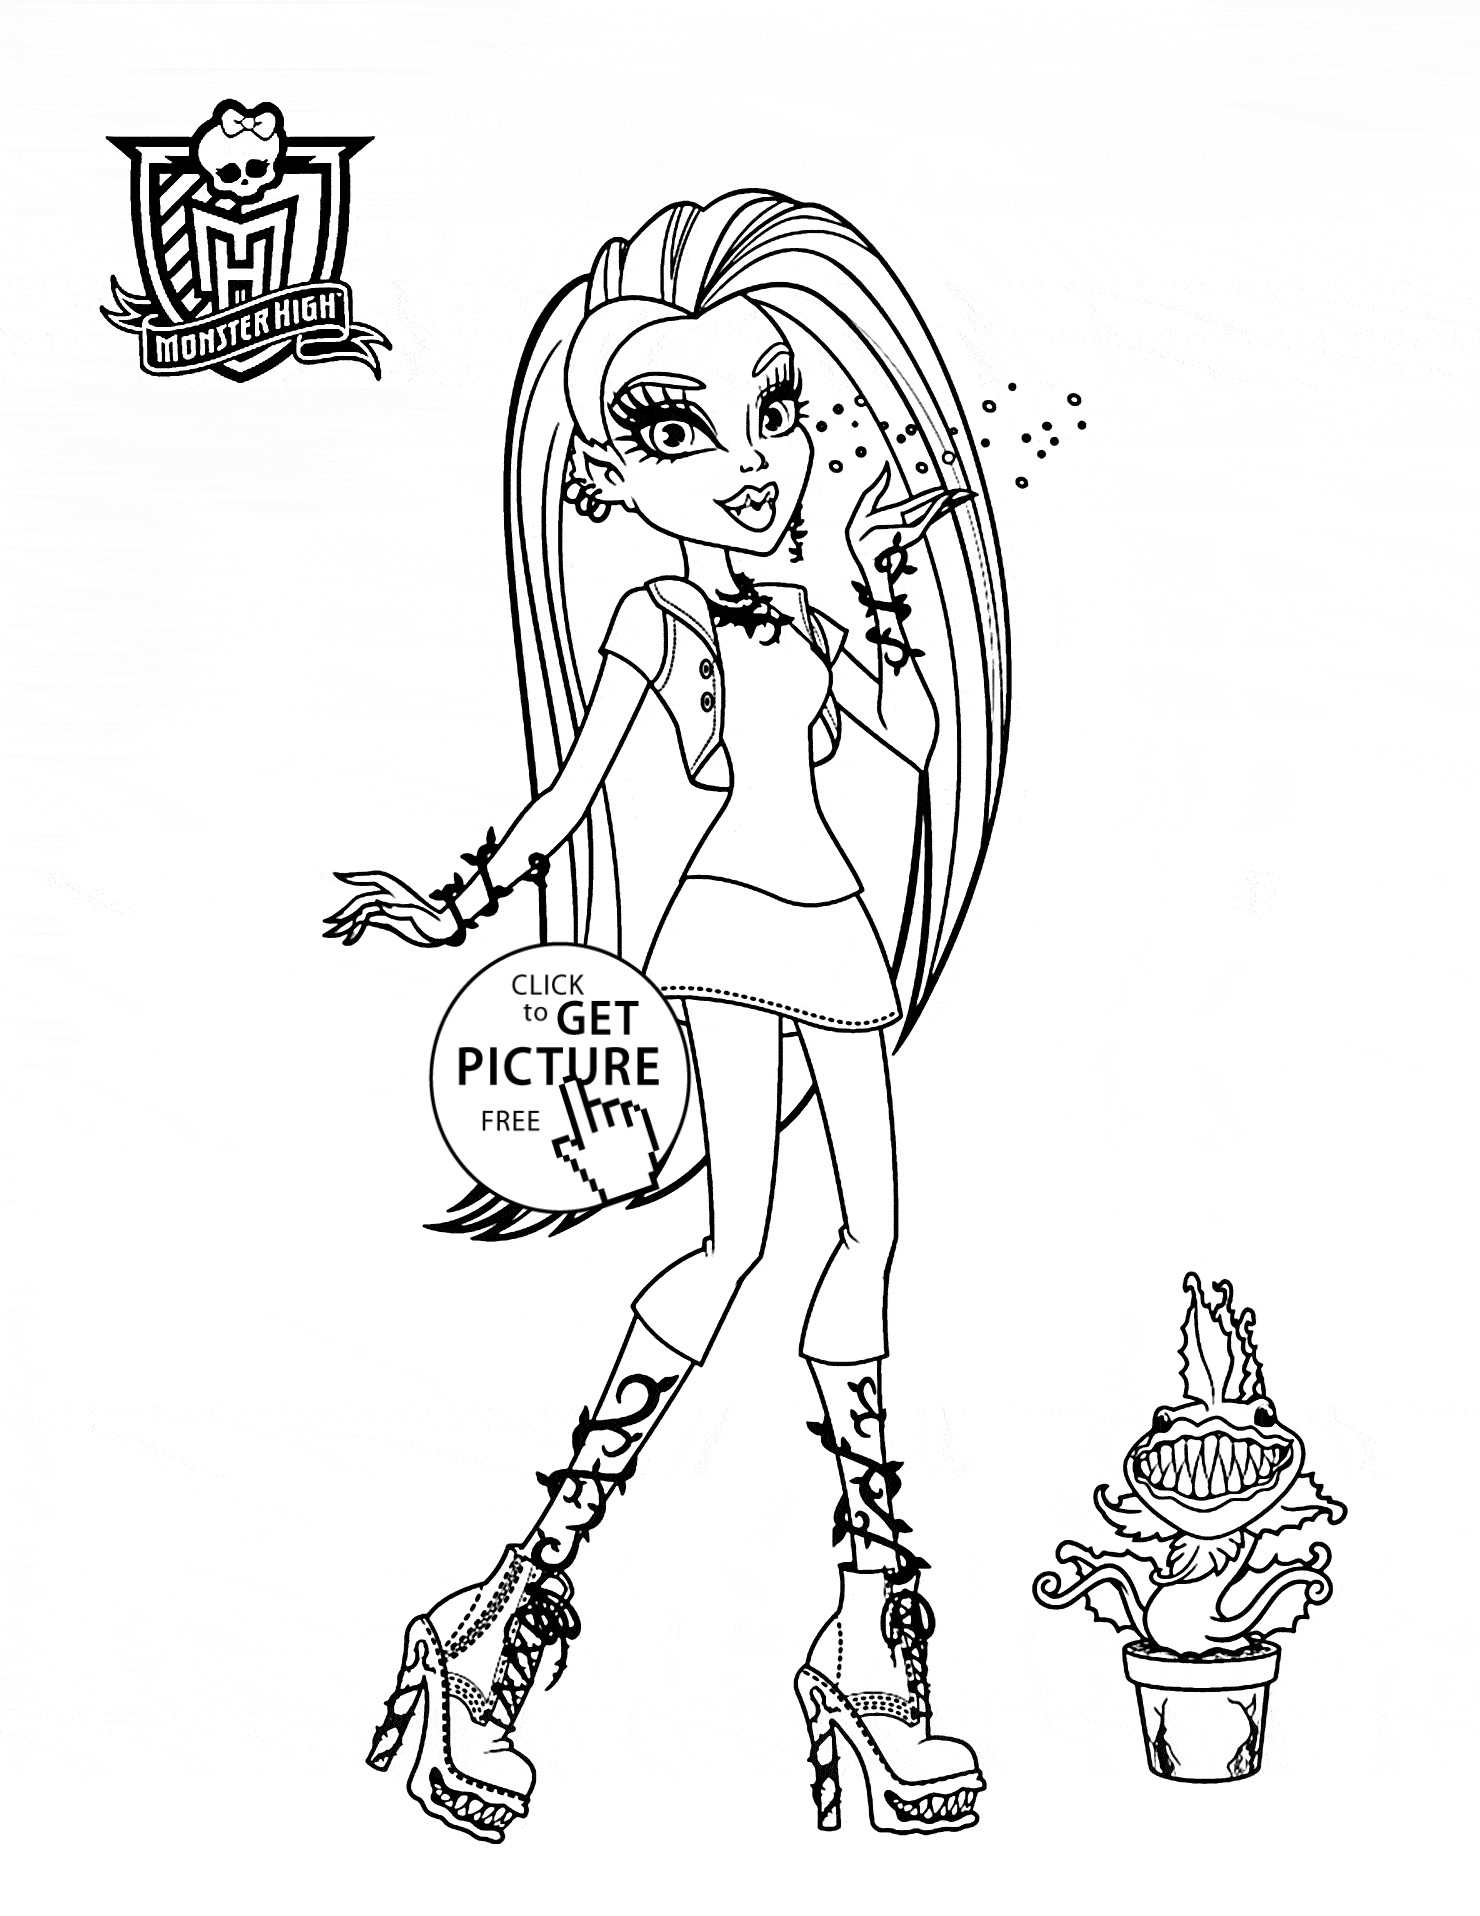 Free Coloring Pages For Girls Monster High
 Venus McFlytrap Monster High coloring page for kids for